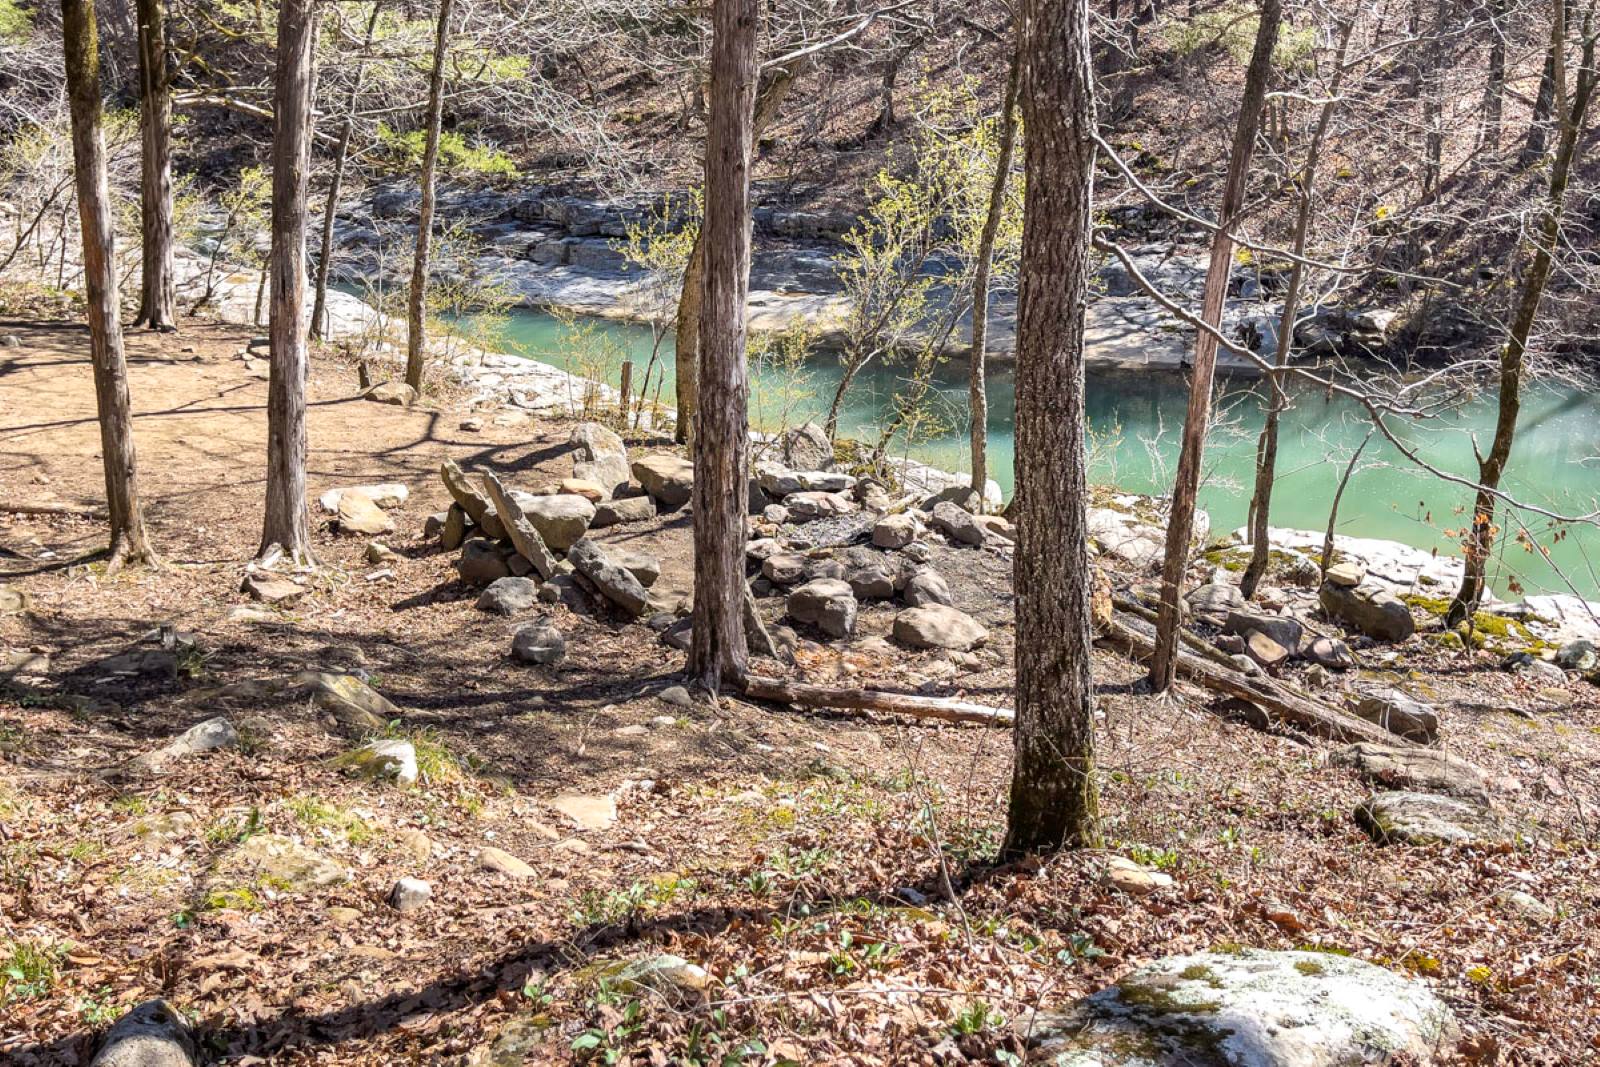 A beloved campsite and firepit with rock-constructed chairs near Cecil Creek is a popular spot to stop for lunch or a snack. (Photo by Sony Hocklander)